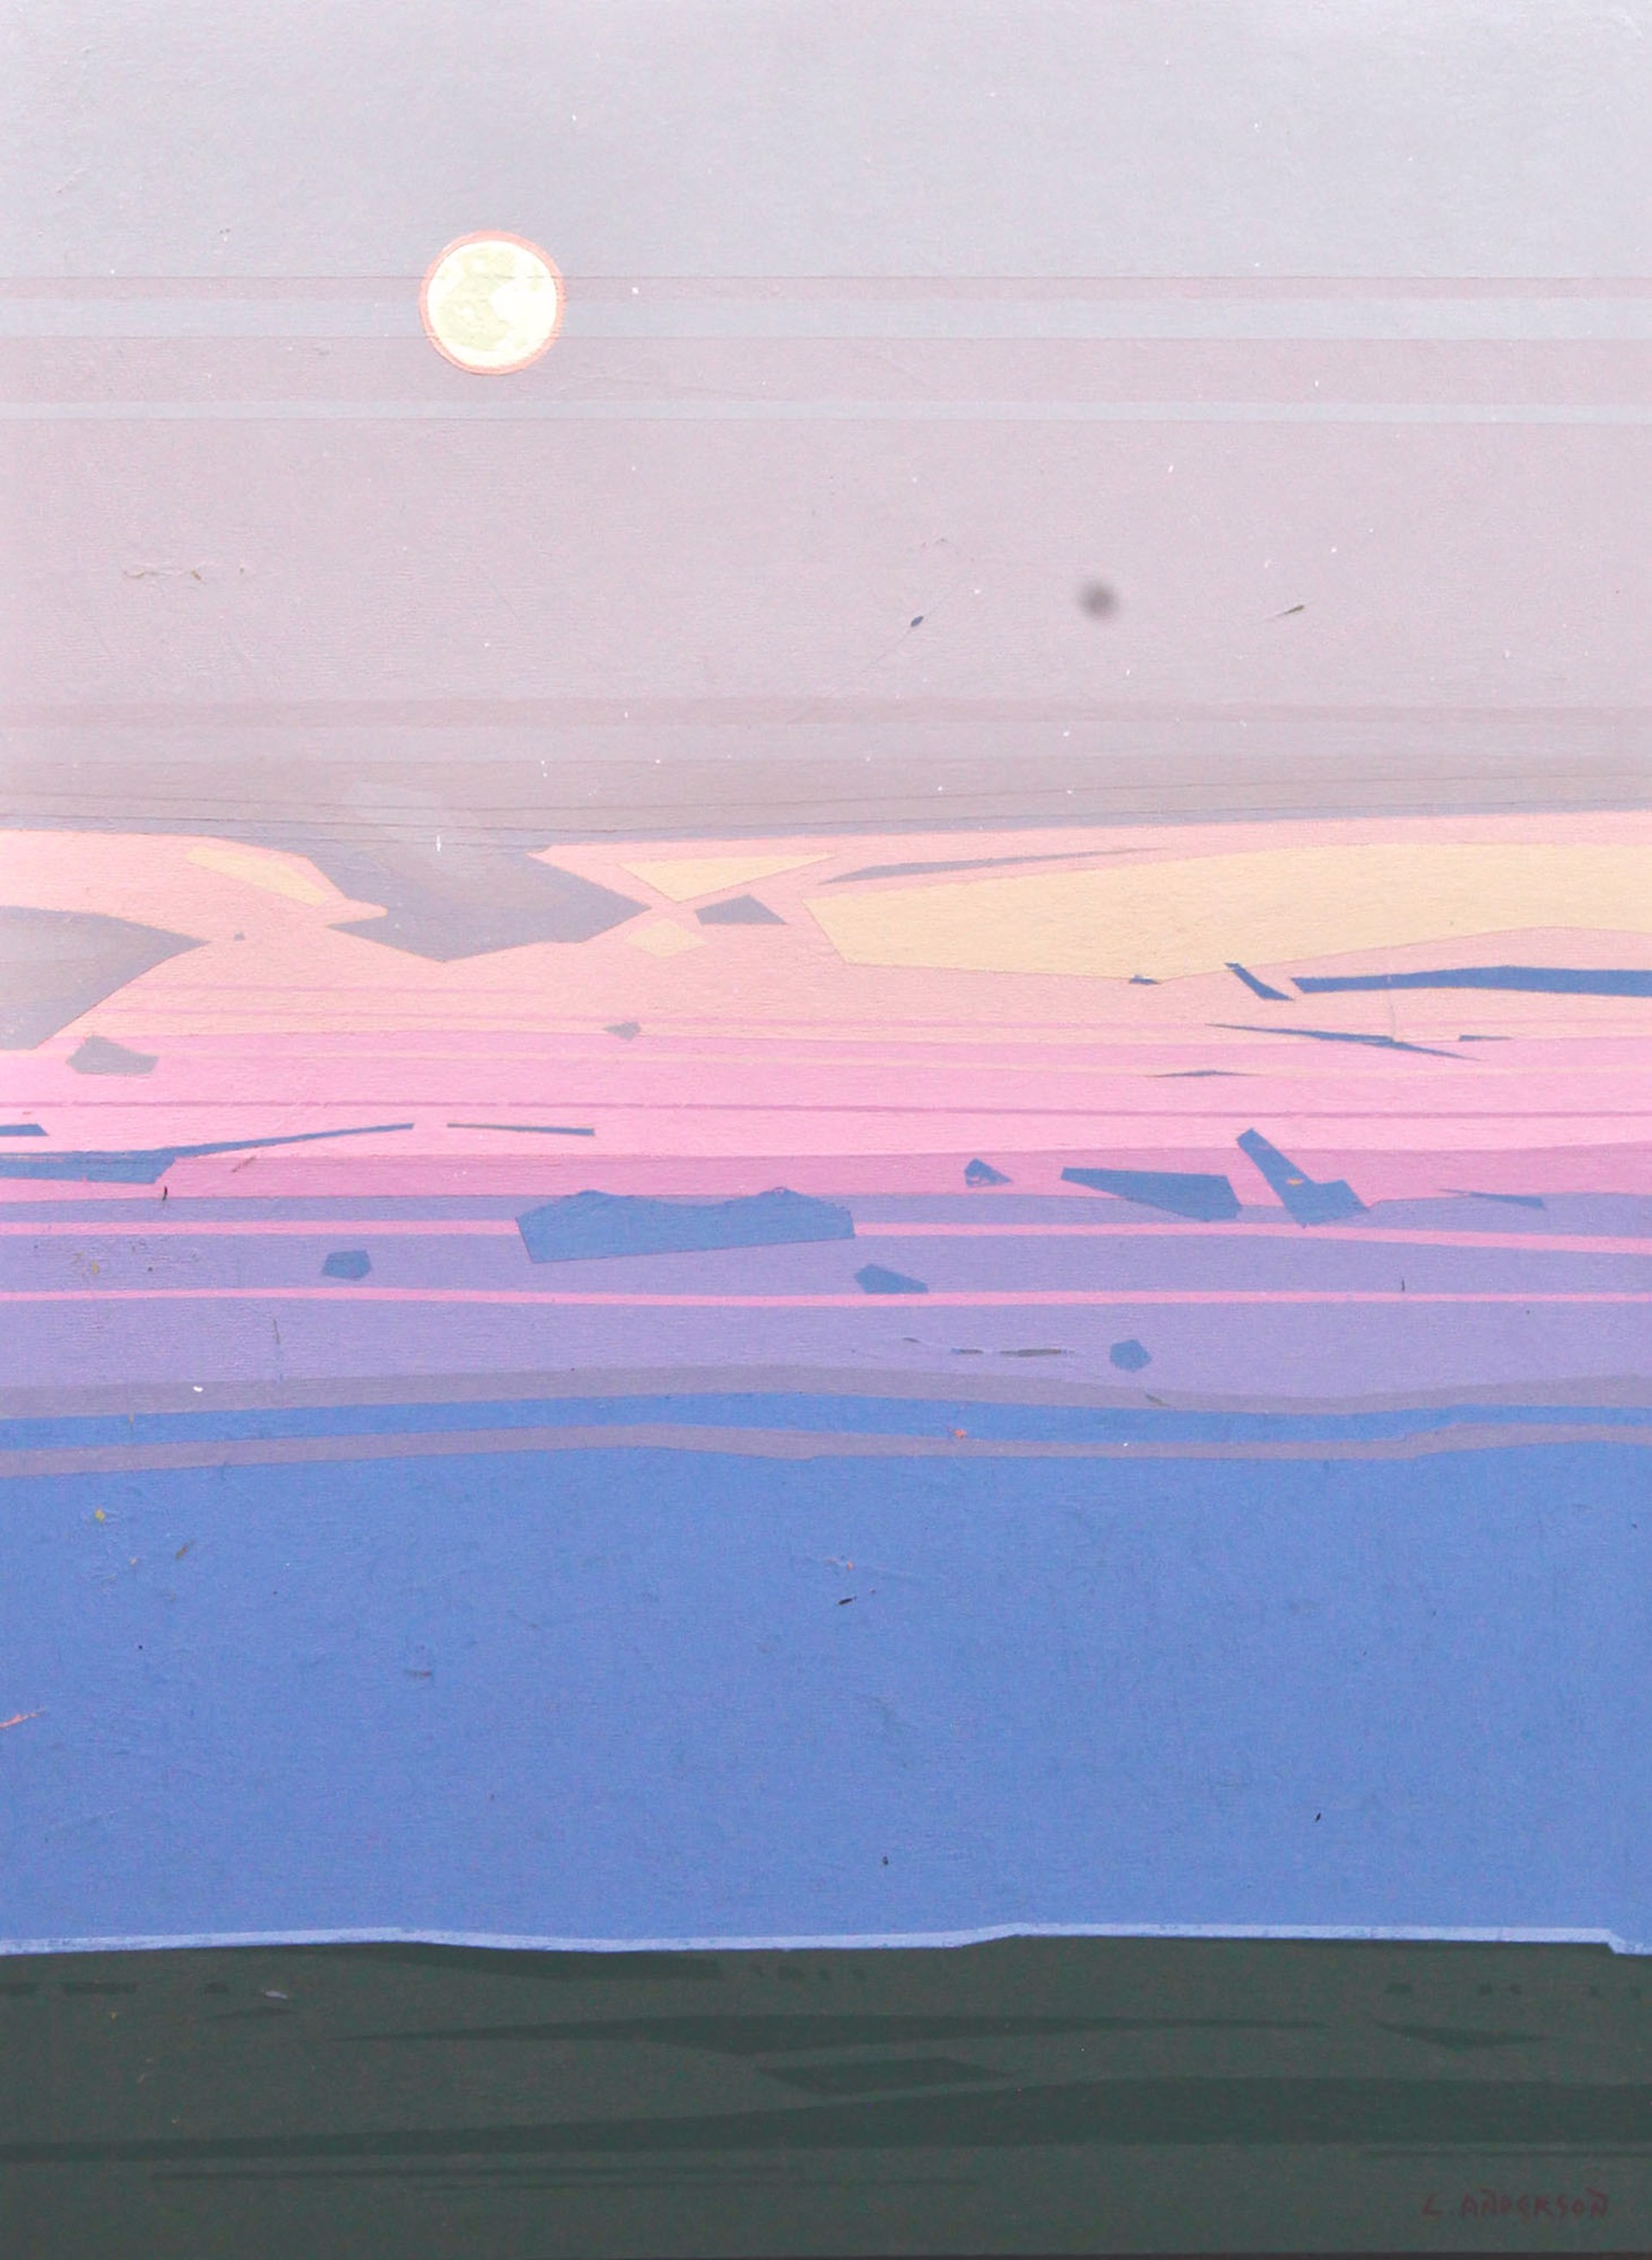 Original Painting By Luke Anderson Featuring A Graphic Prairie Landscape In Pink And Purple Tones With Full Moon